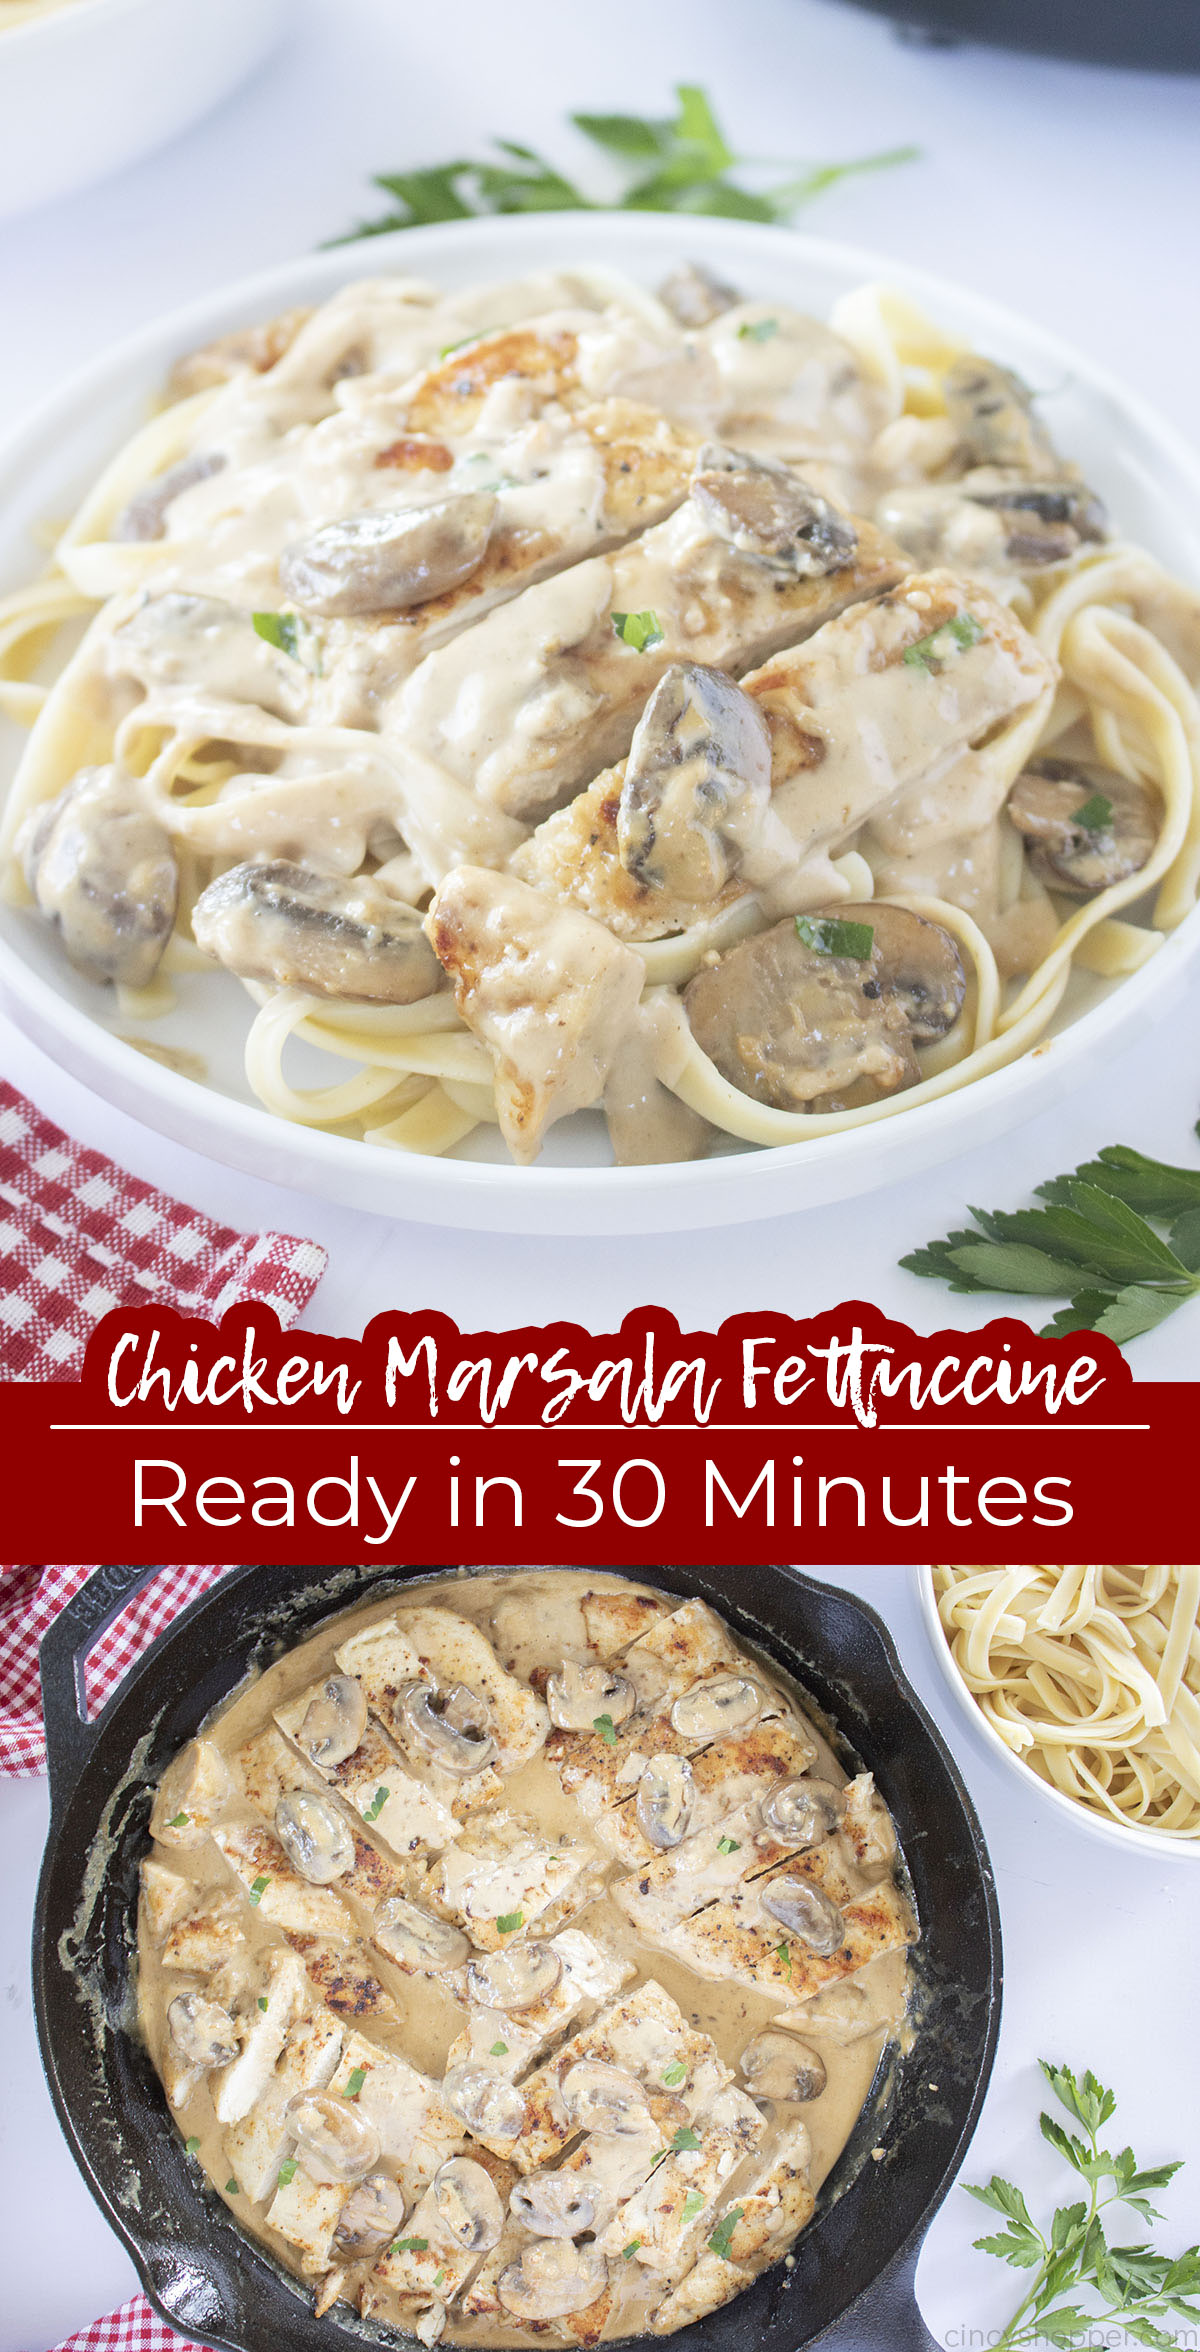 Long pin Text on image Chicken Marsala Fettuccine Ready in 30 Minutes.